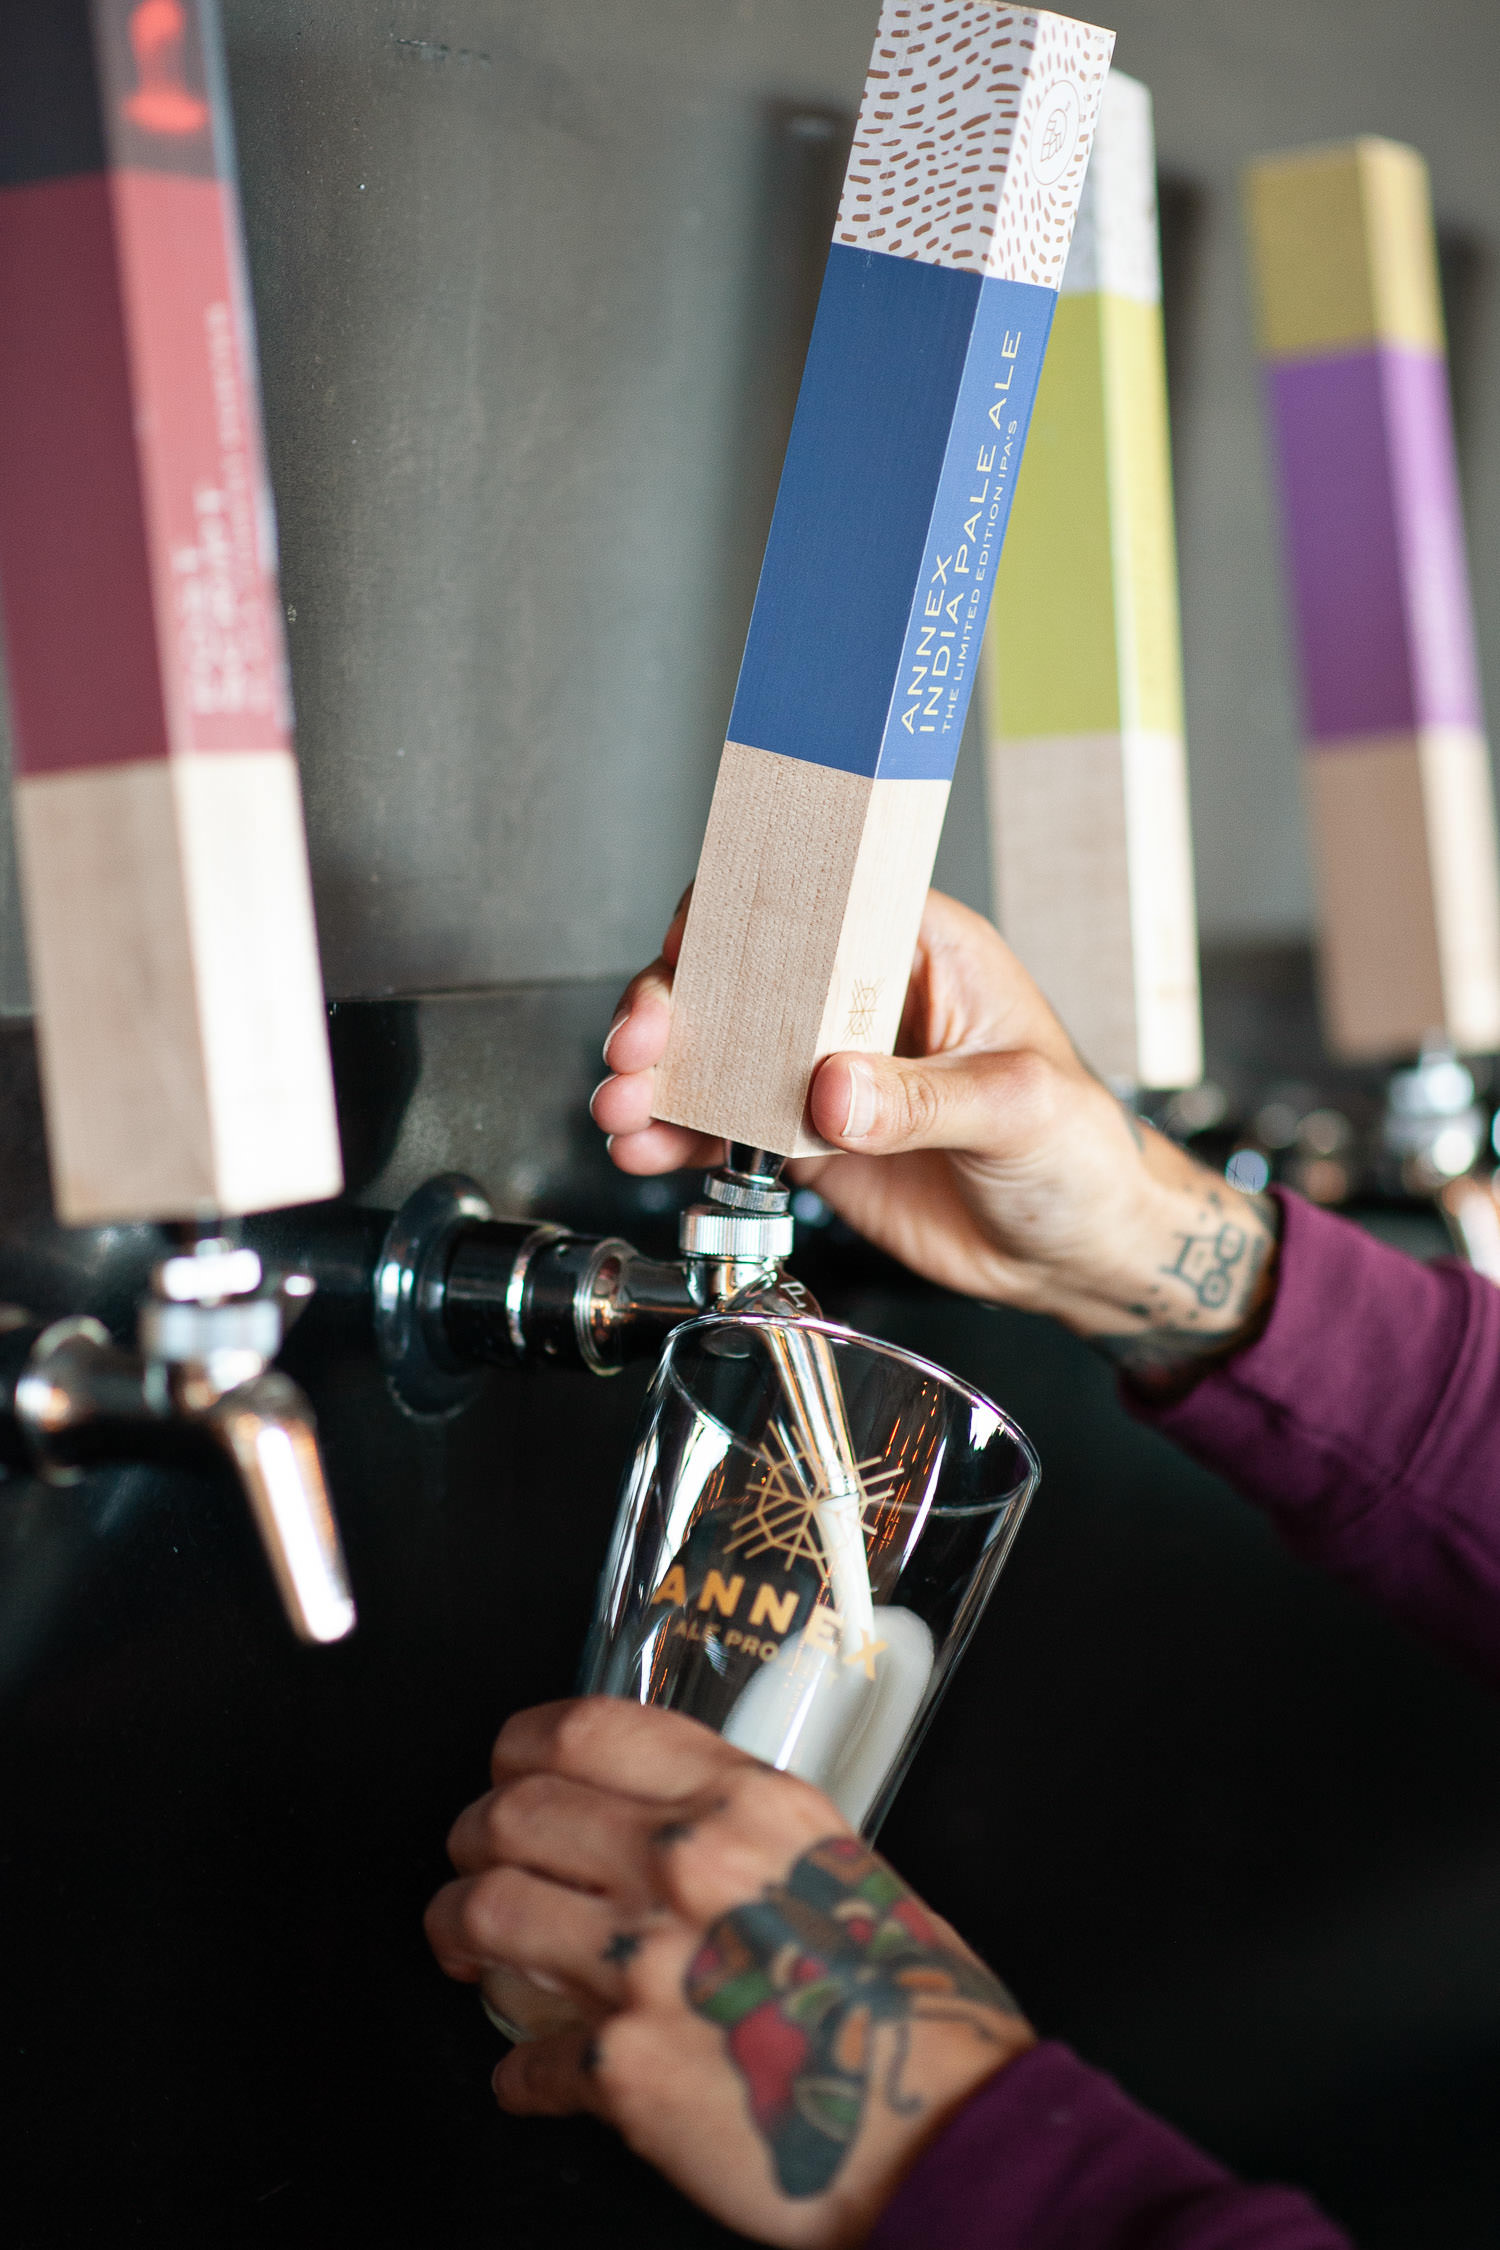 Each holiday mini session includes a $25 gift card from Annex Ale Project